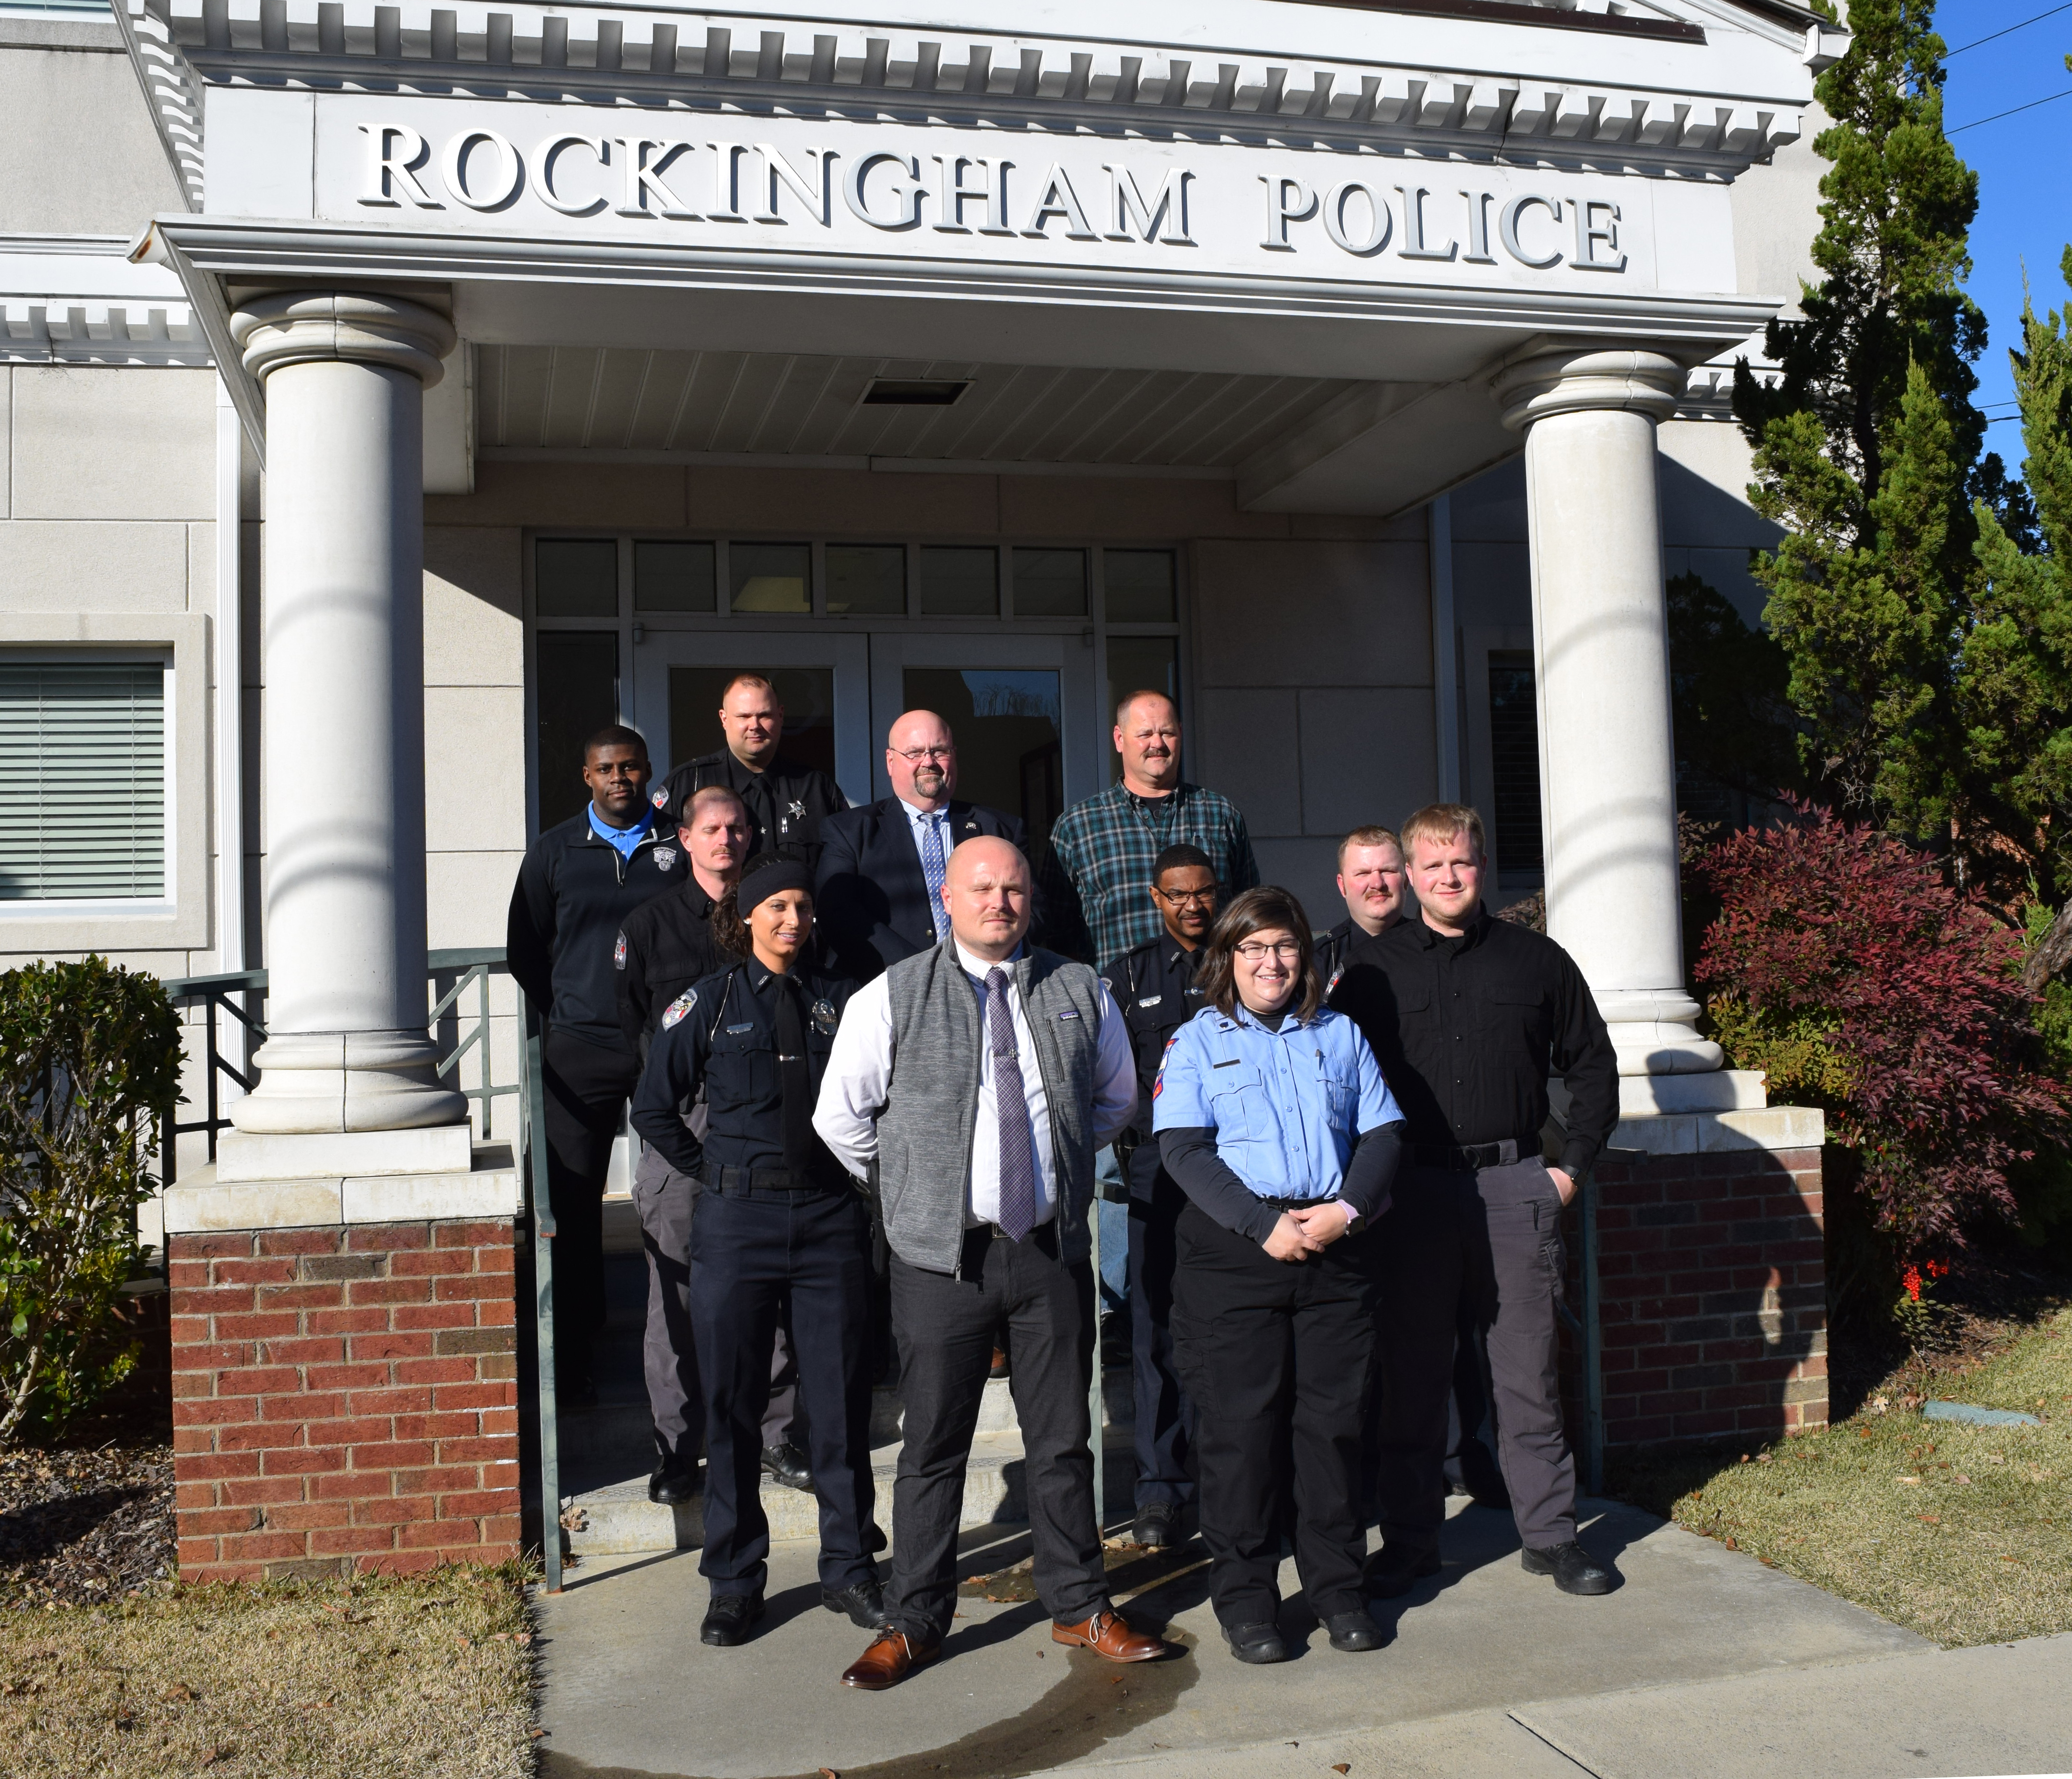 First responders stand on the steps of the Rockingham Police Department.